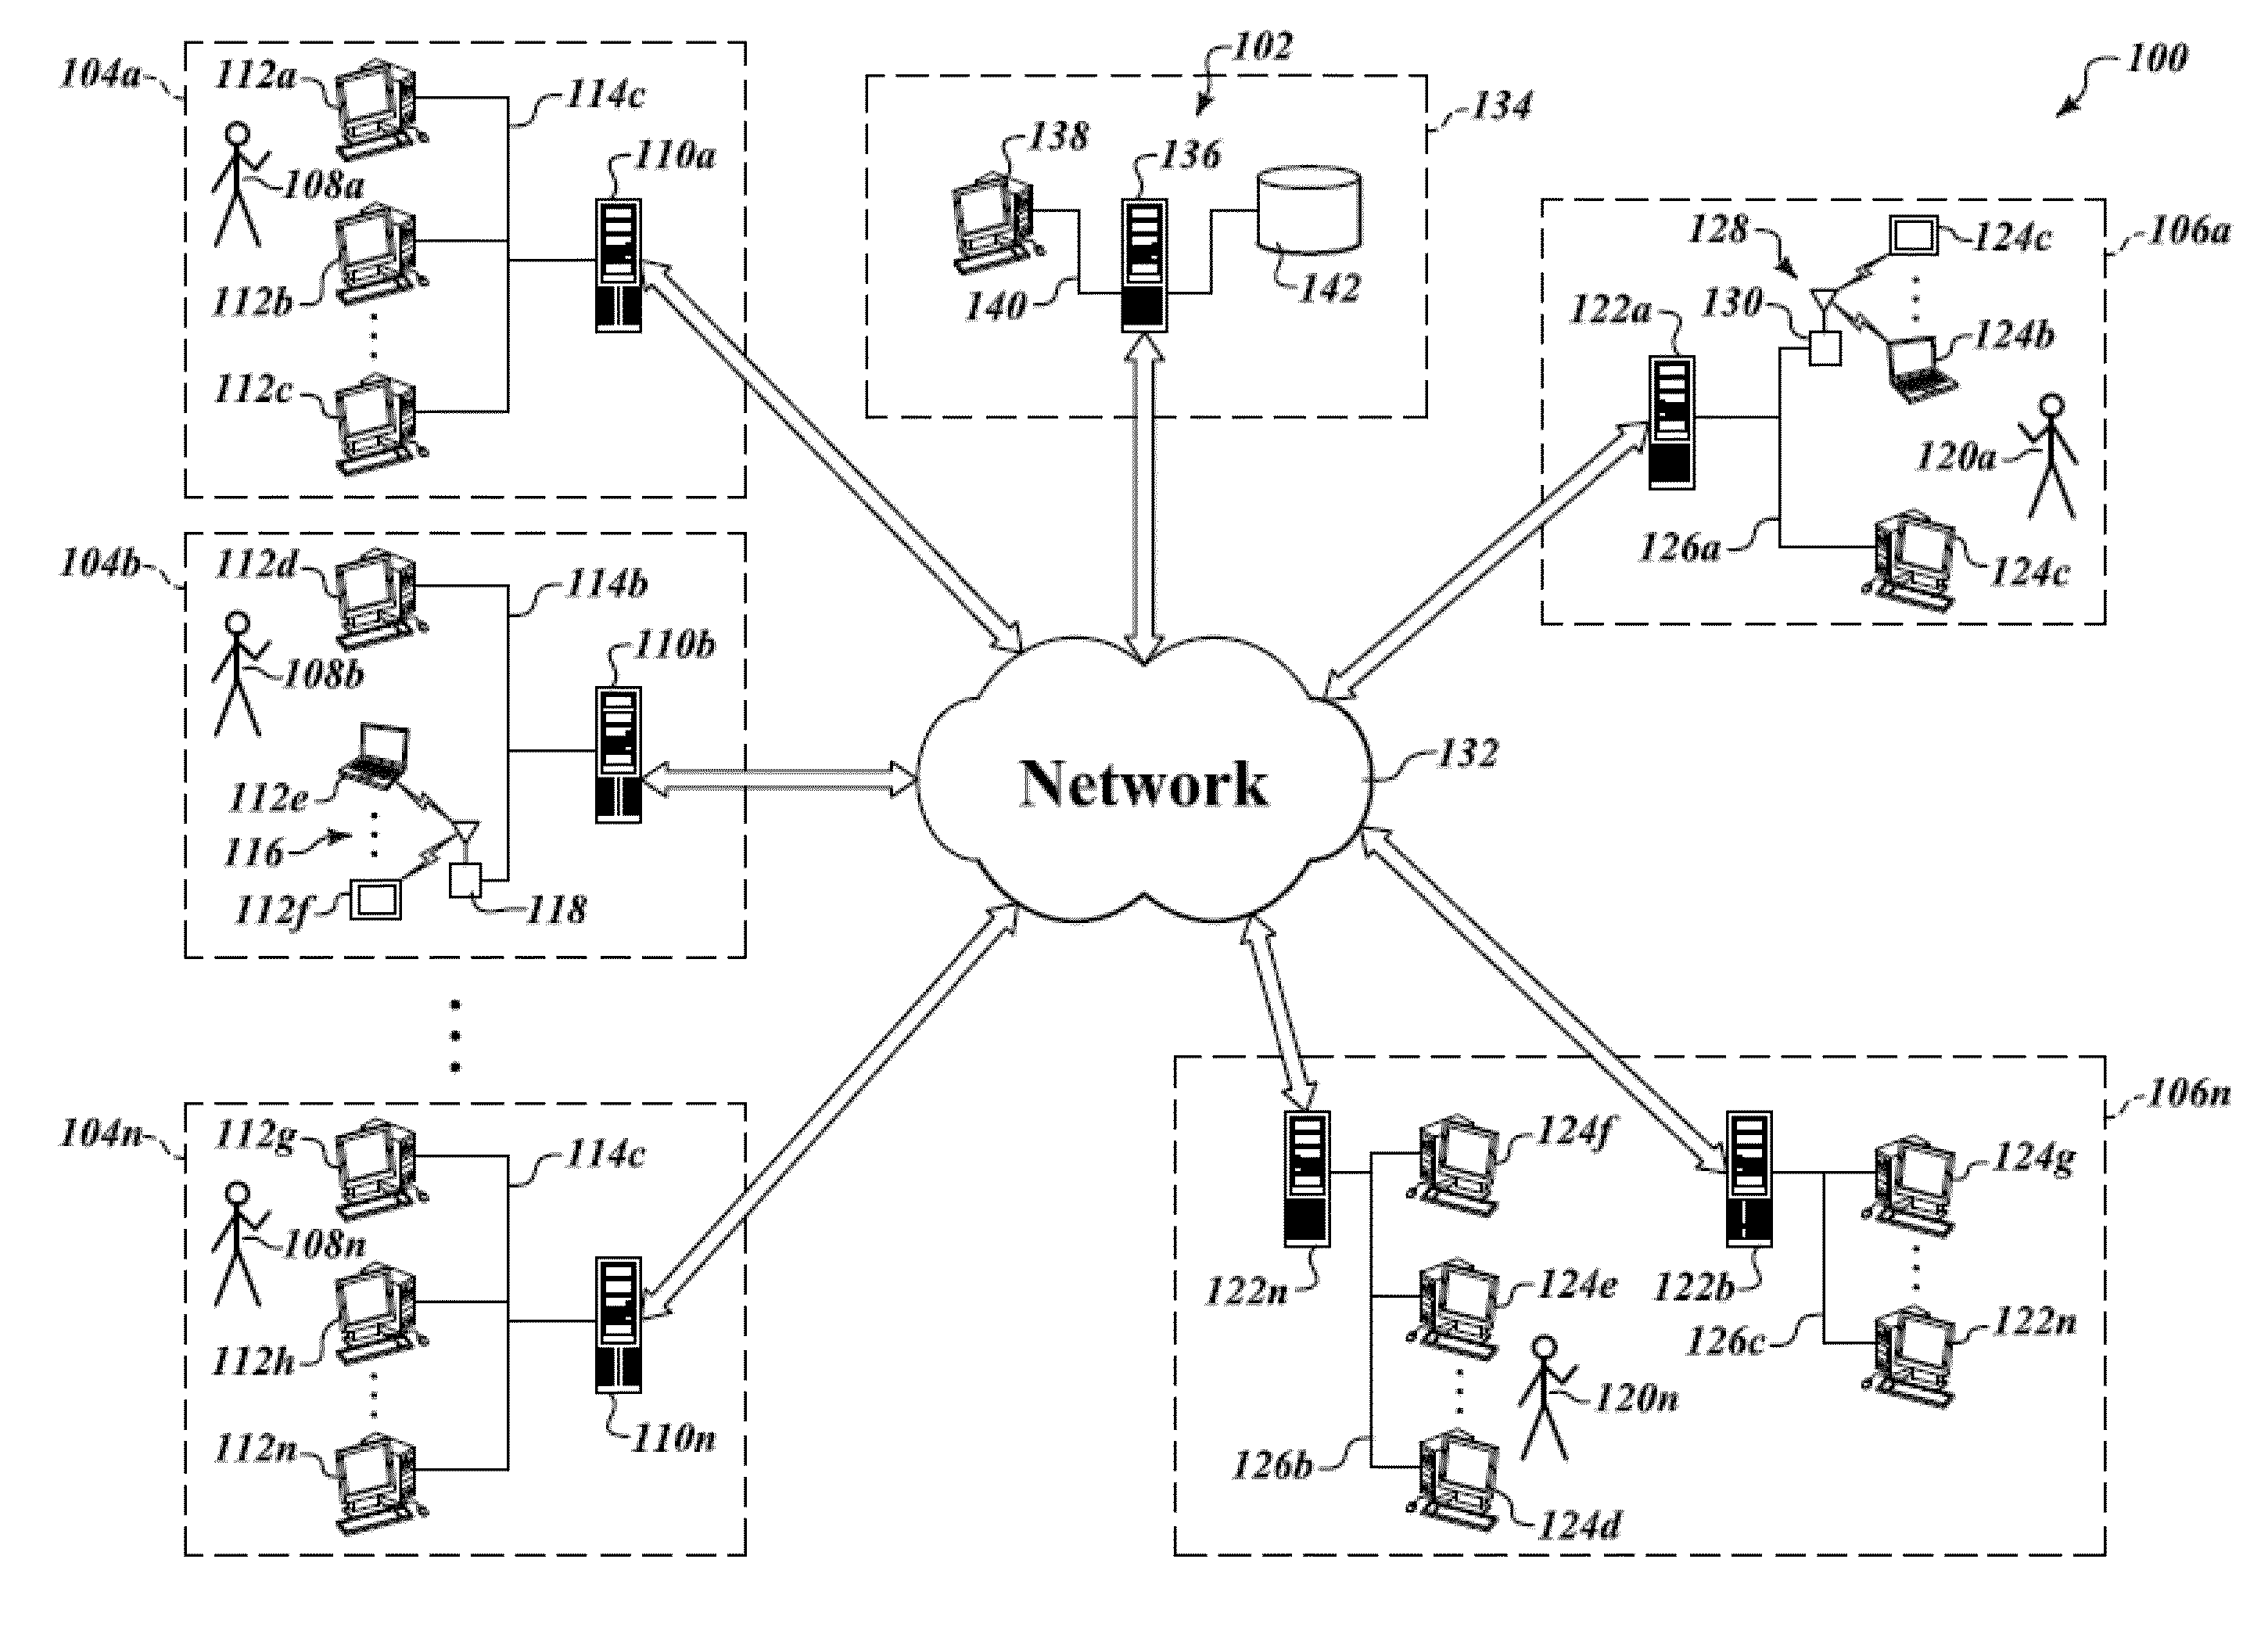 Apparatus, method and article to automate and manage communications to multiple entities in a networked environment